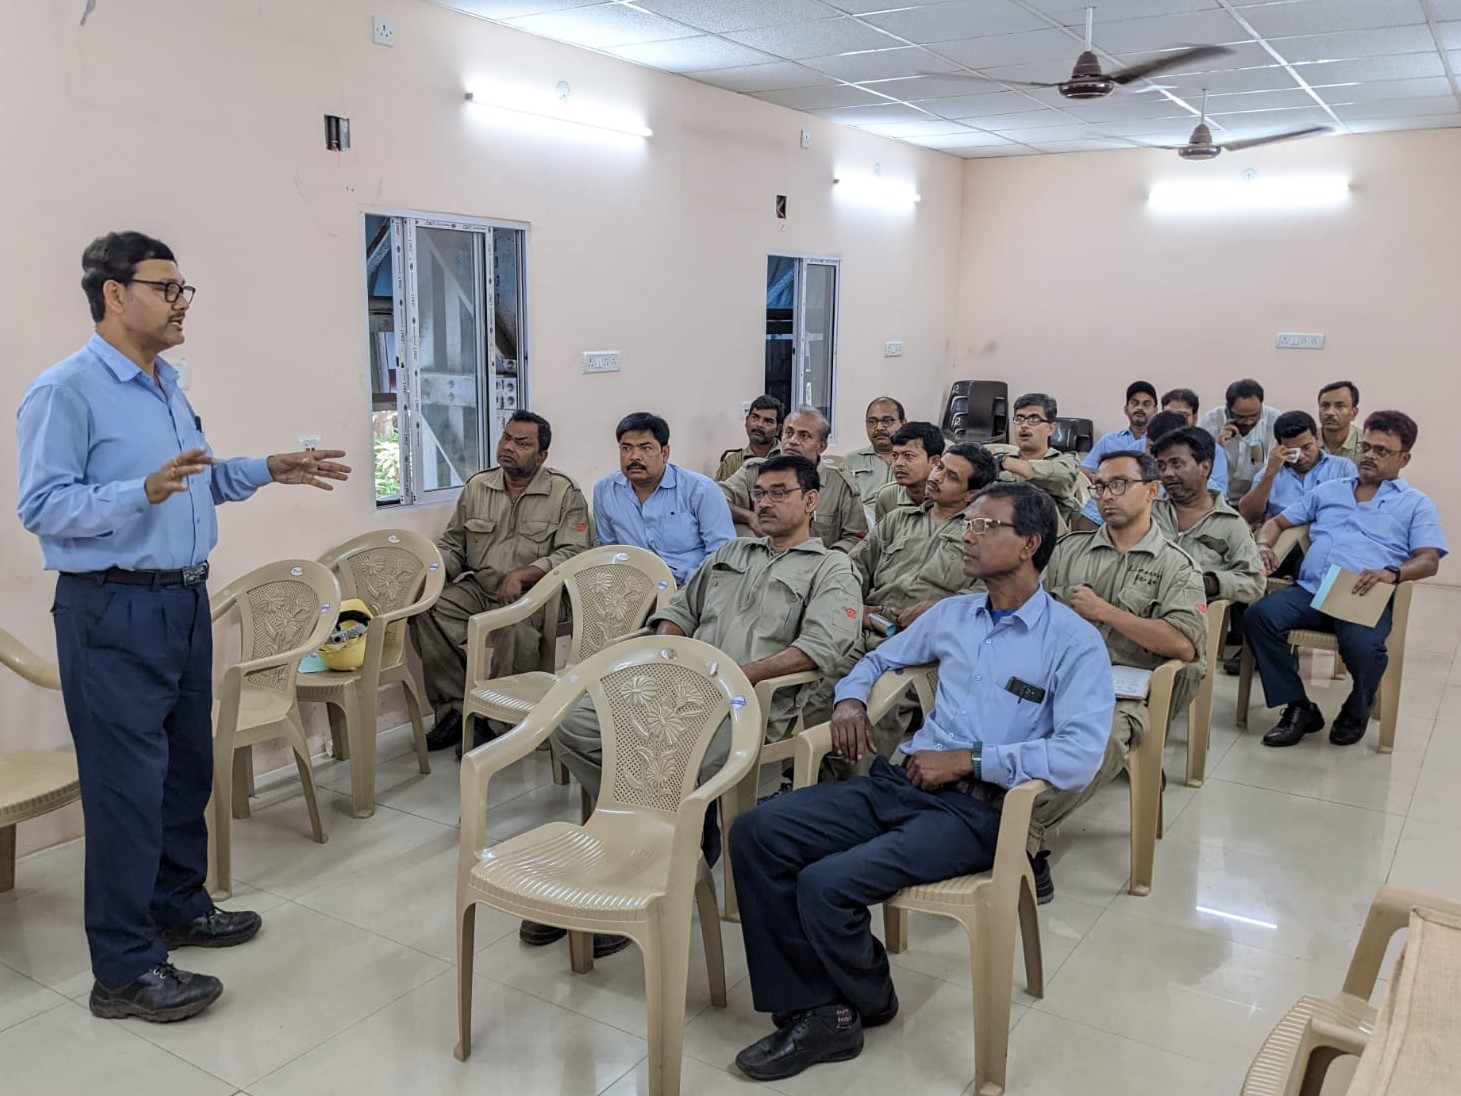 Image 1 - Safety Training through GSTK for employees at FOJ Unit on 25 Mar 23